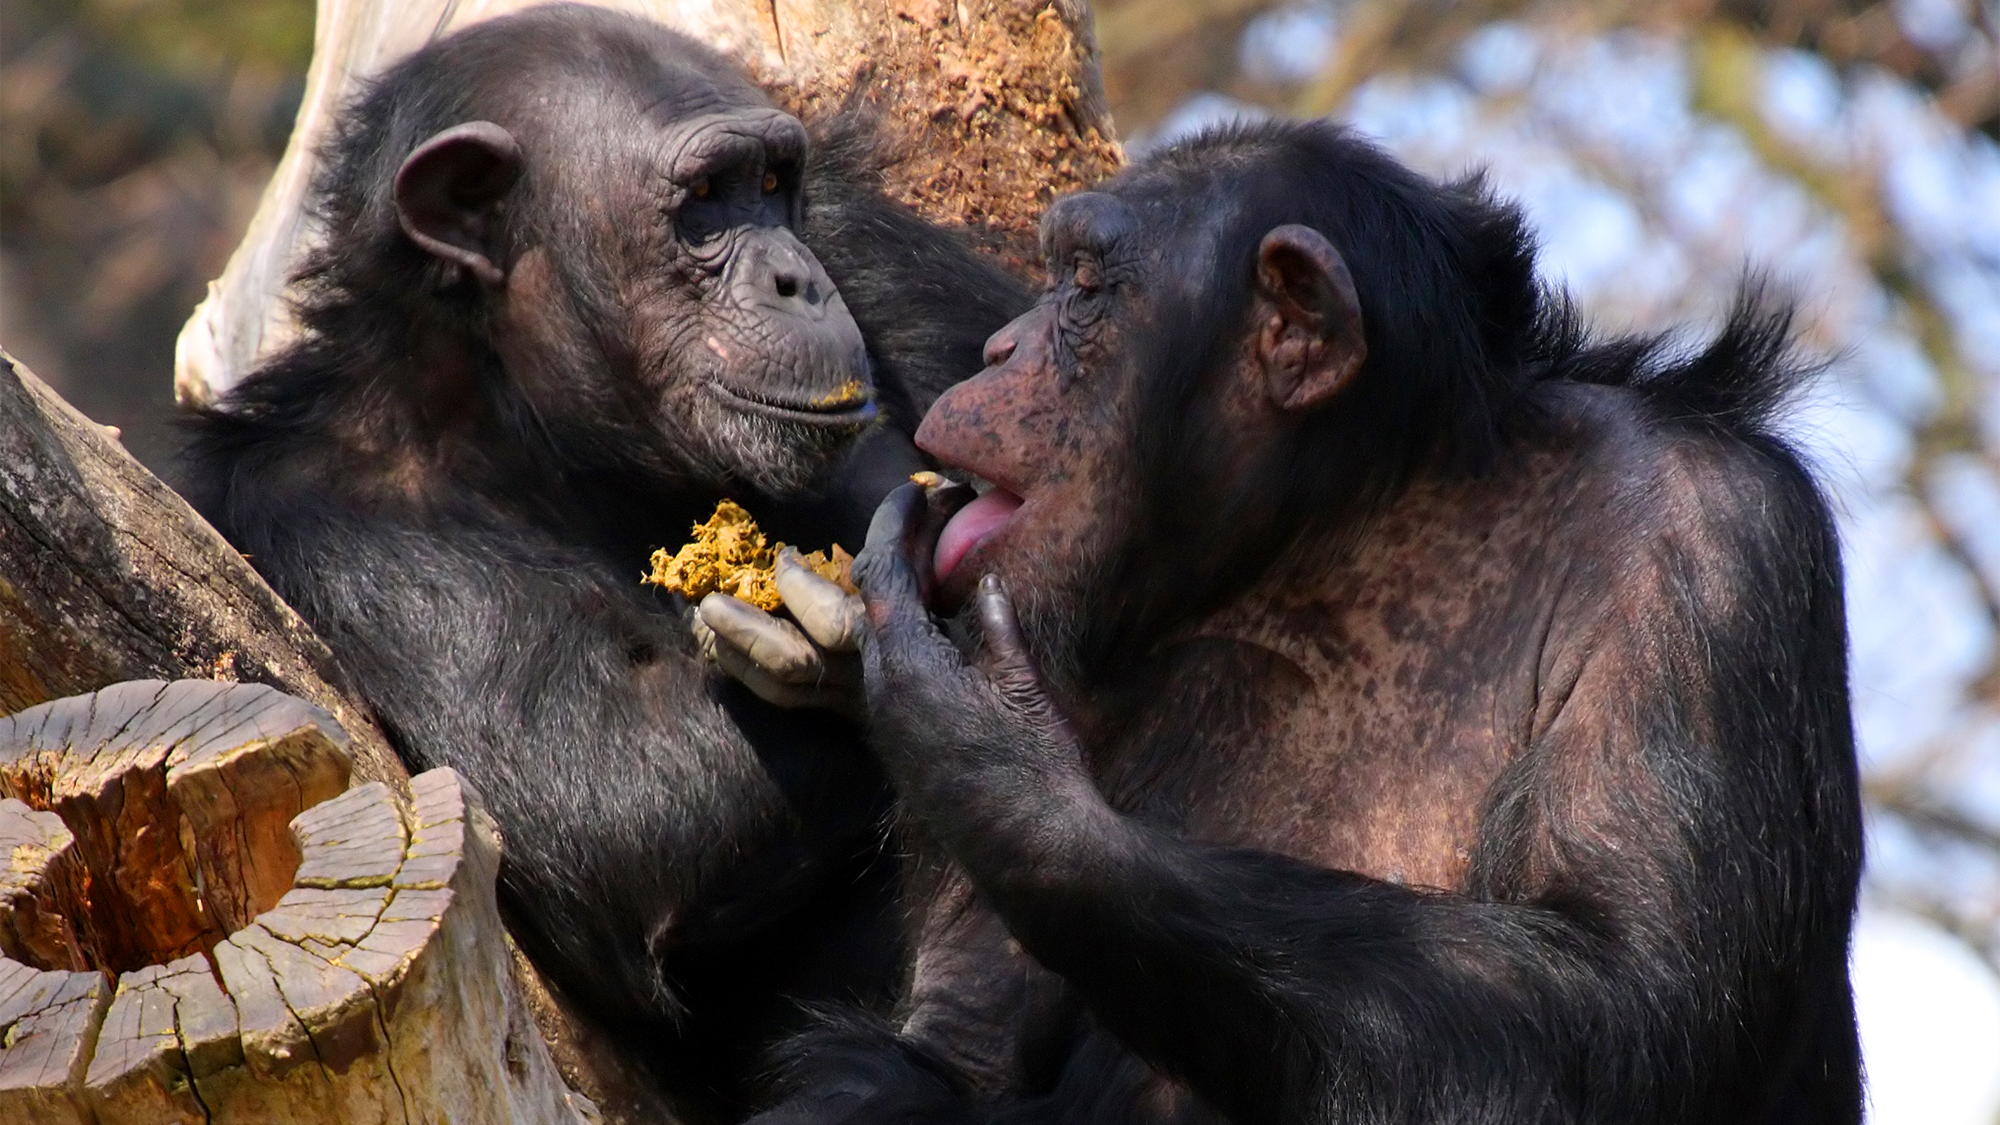 Two chimpanzees share a meal. A new study found that same-sex sexual behavior helps establish and maintain positive social relationships in animals including chimpanzees, bighorn sheep, lions, and wolves.